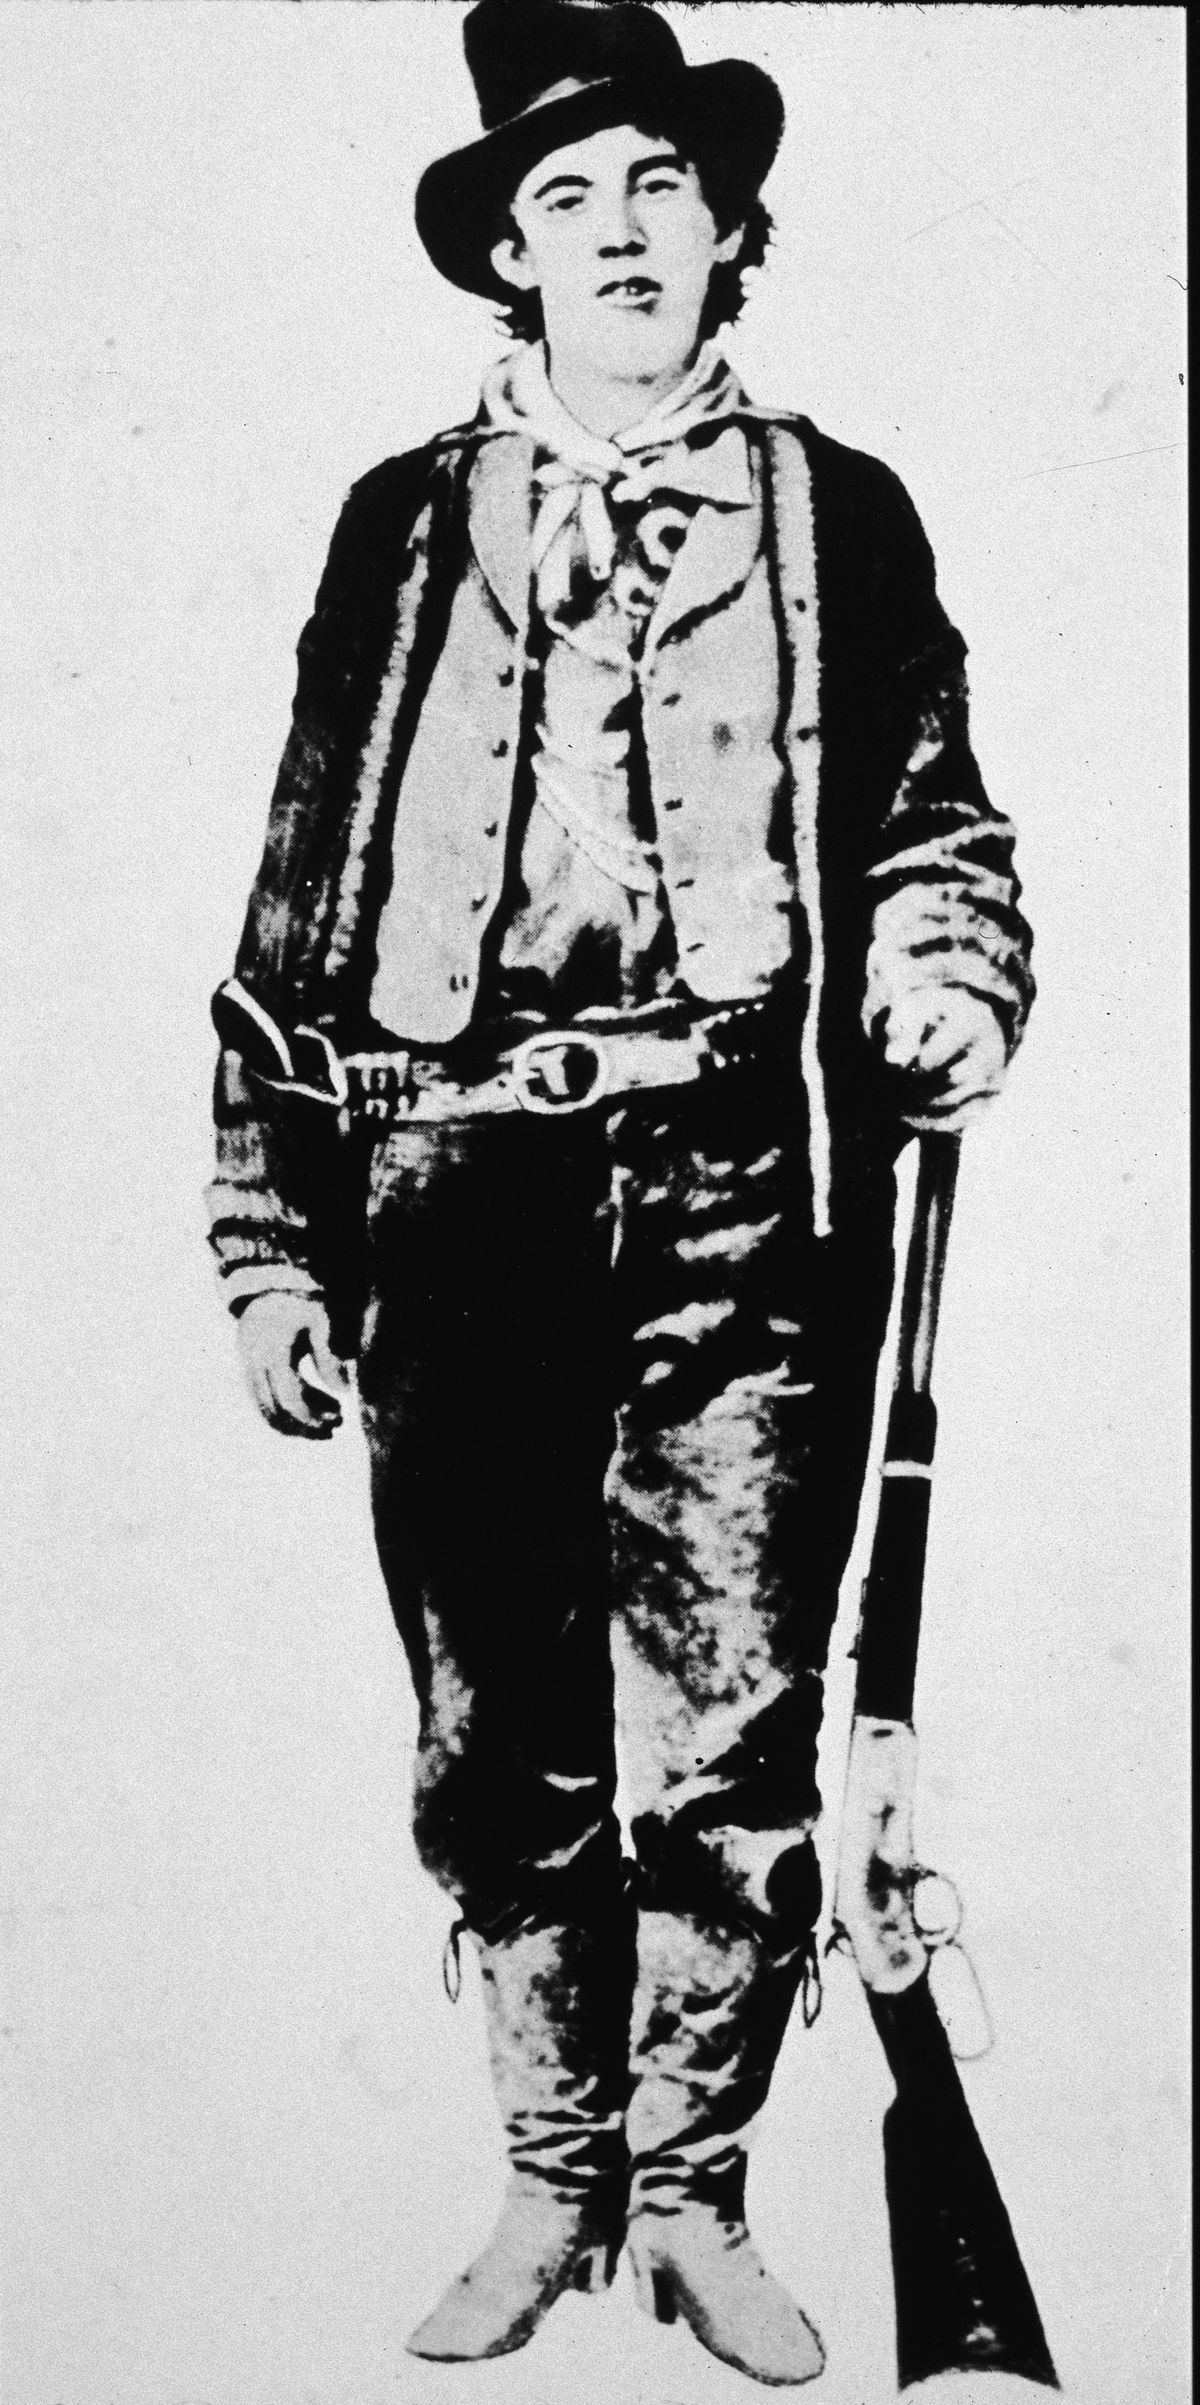 Outlaw William ‘Billy The Kid’ Bonney